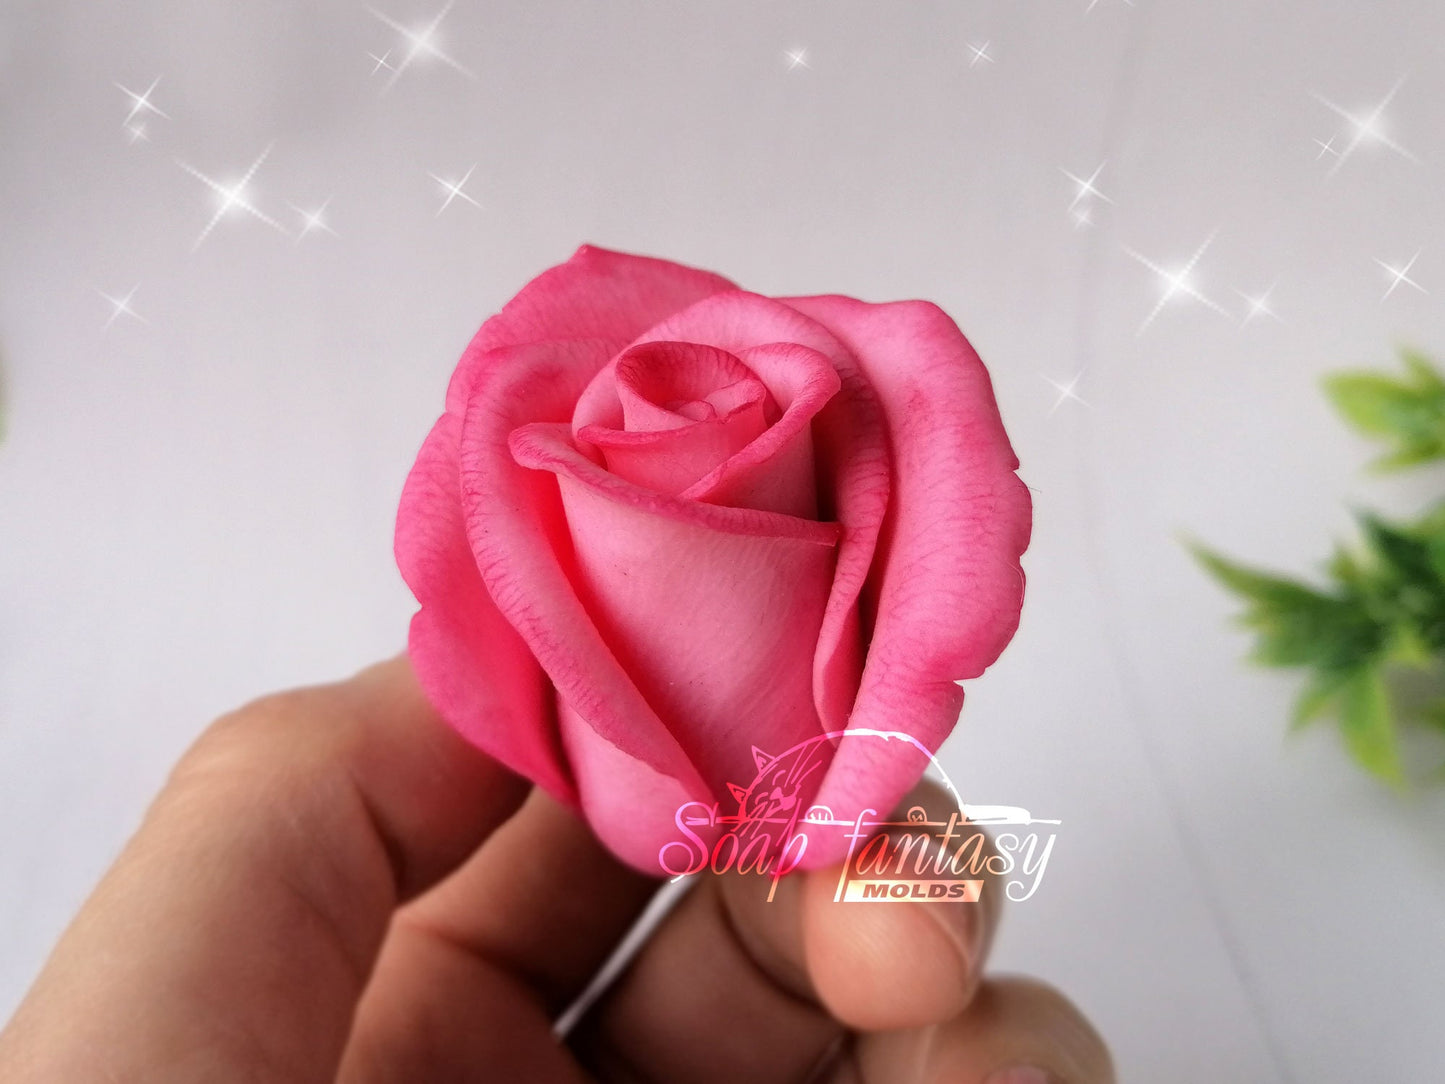 Rose "Julie" silicone soap mold - for soap making (Made of high quality silicone)